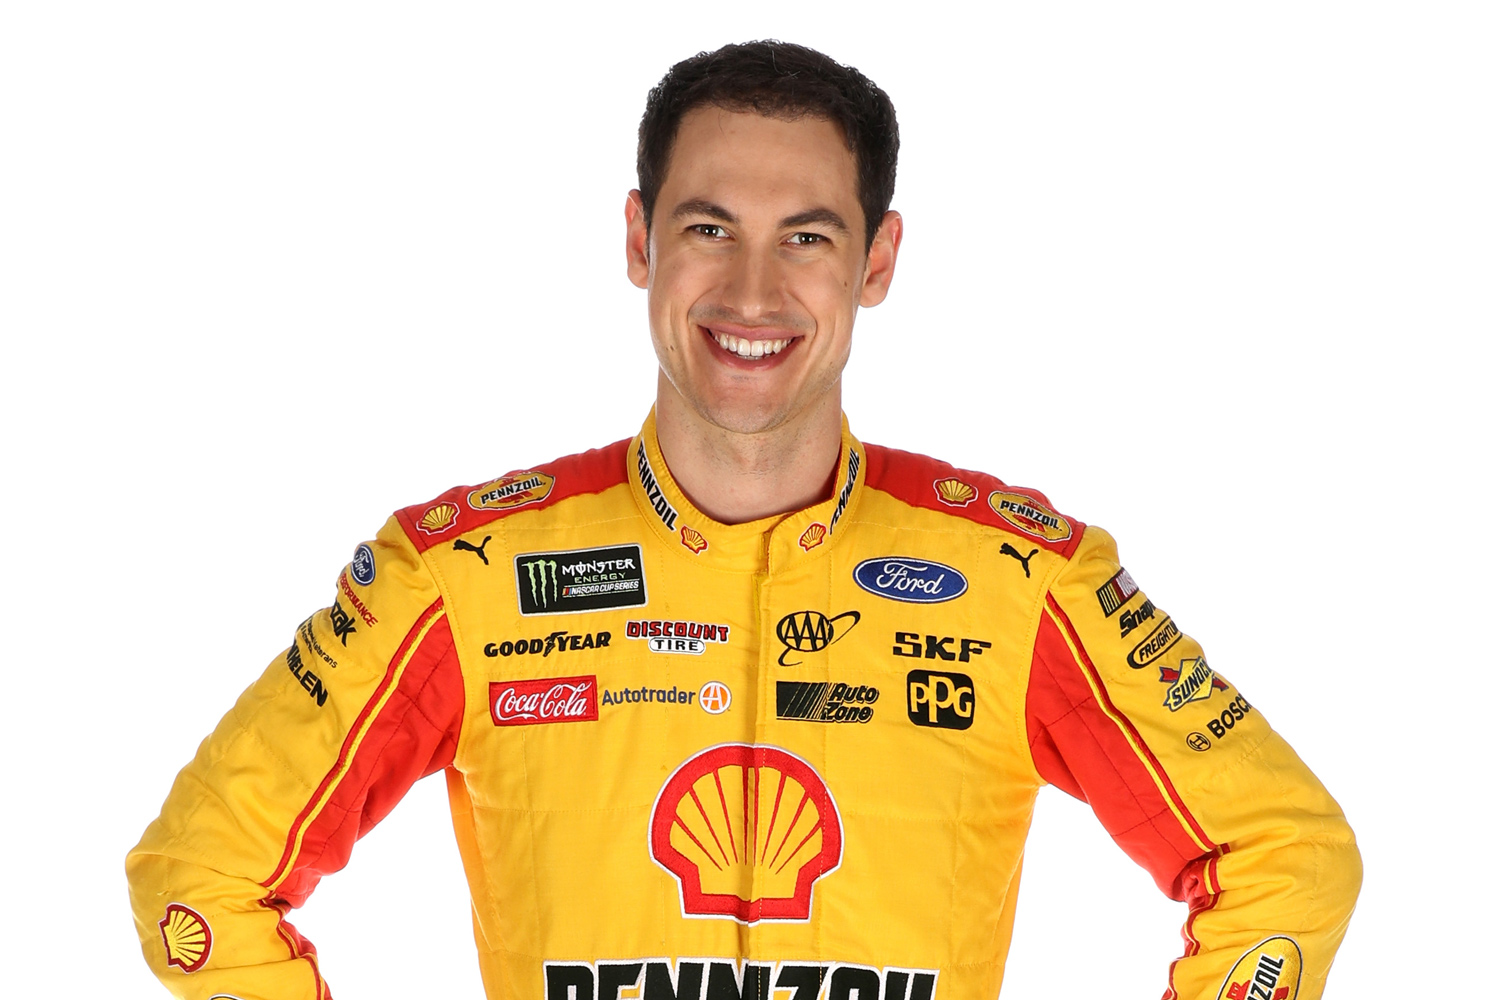 Joey Logano Joins 'Oath' Board of Advisers Chaired by Ser...